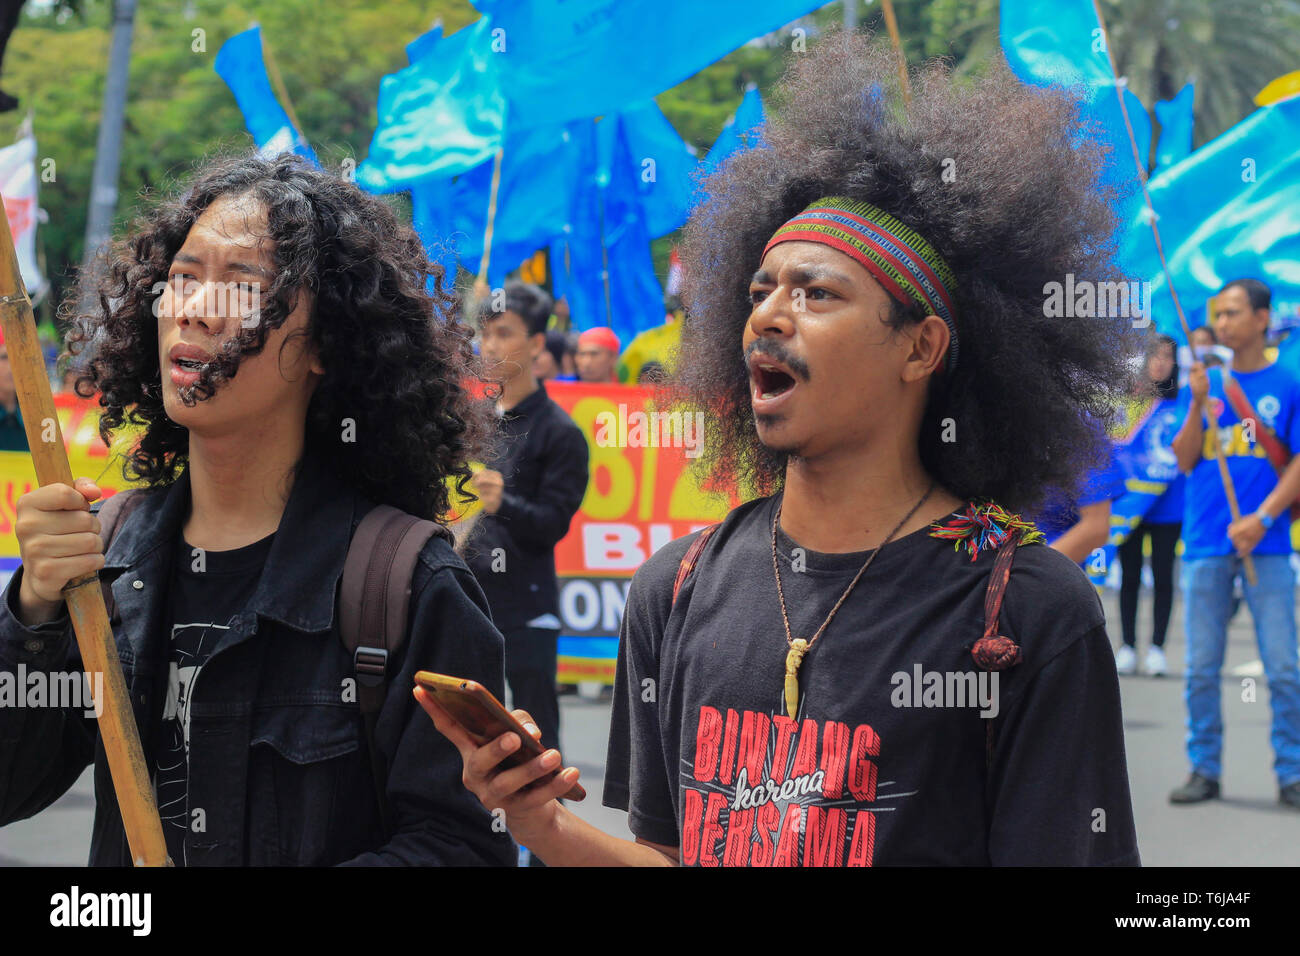 Indonesian workers chanting slogans during the rally. Thousands of workers are urging the government to raise minimum wages and to improve working conditions. Stock Photo